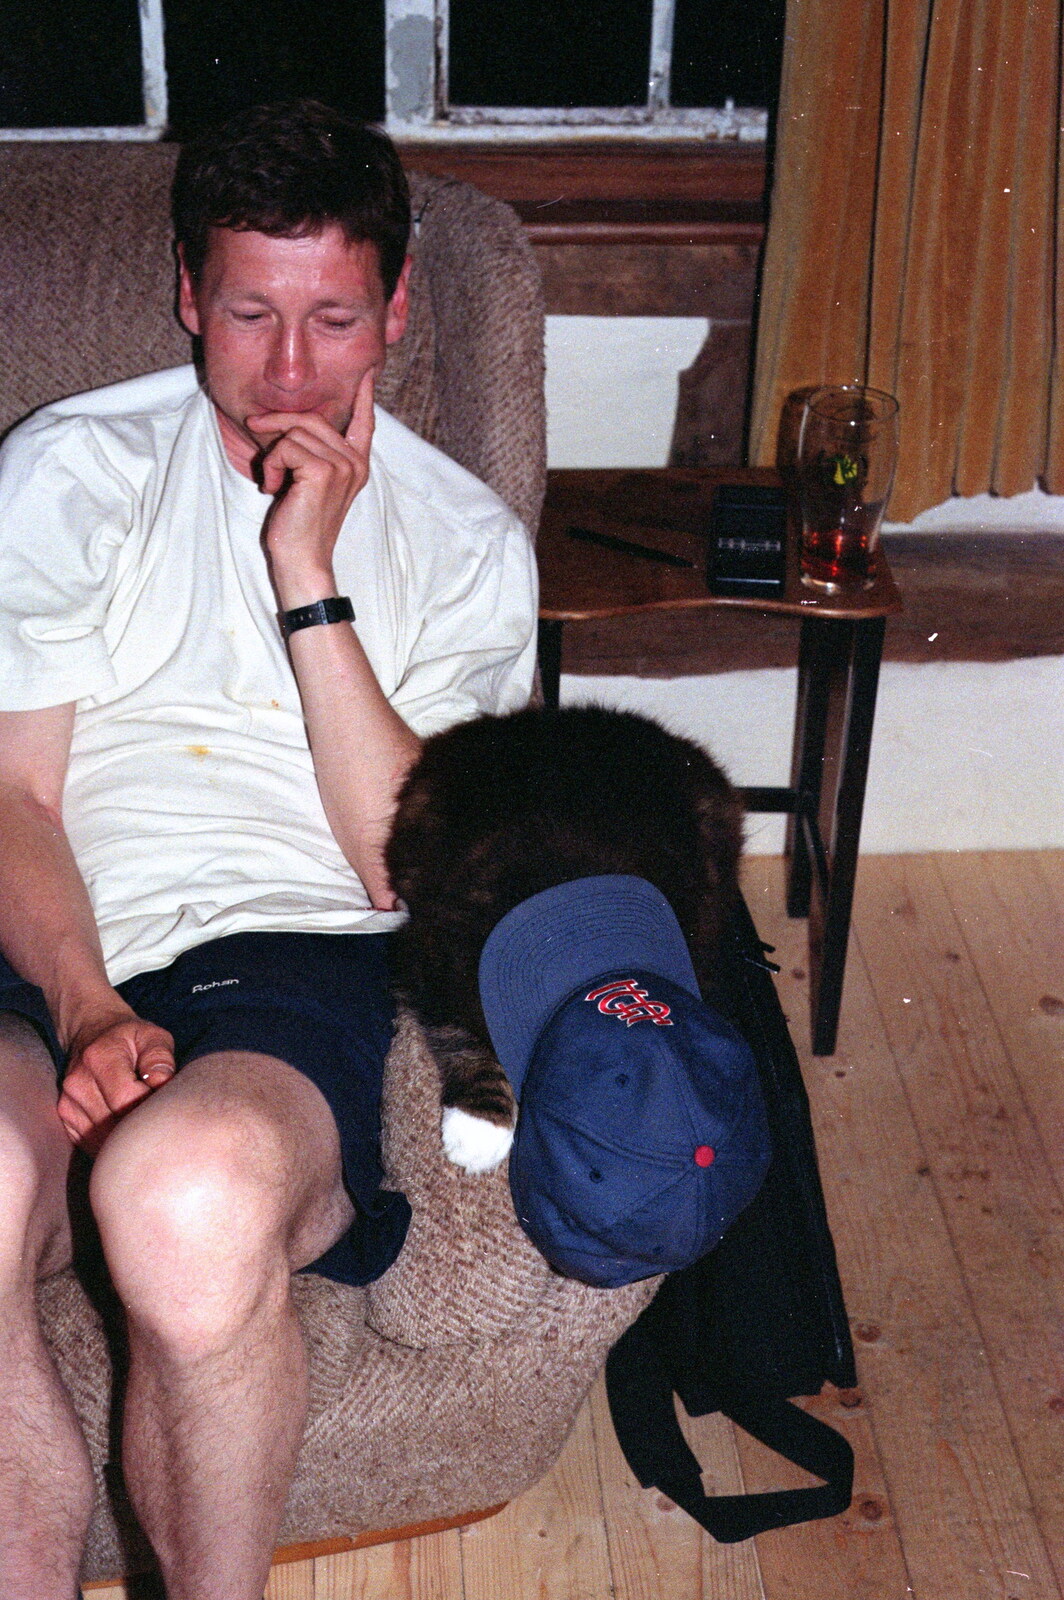 Apple sticks a baseball cap on Sophie the cat from Wavy's Thirtieth Birthday, The Swan Inn, Brome, Suffolk - 24th May 2000